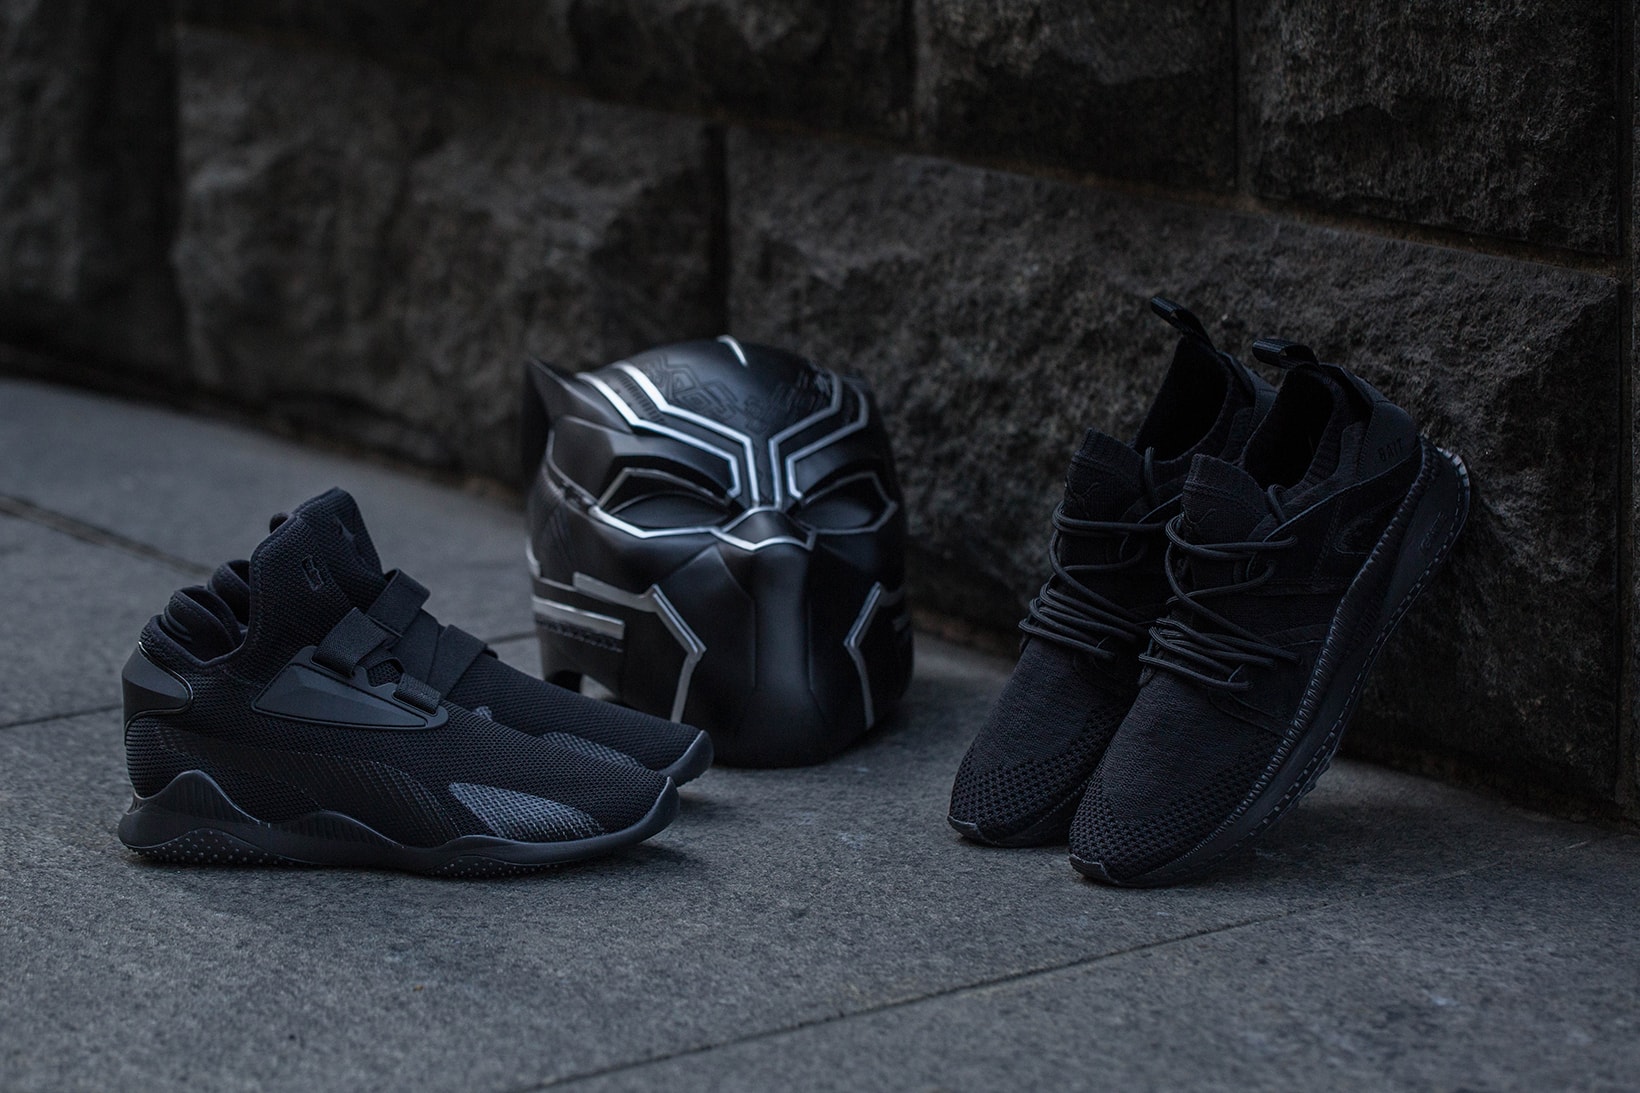 BAIT PUMA Black Panther Pack Tsugi BOG Blaze of Glory Mostro Mid 2018 february release date info sneakers shoes footwear